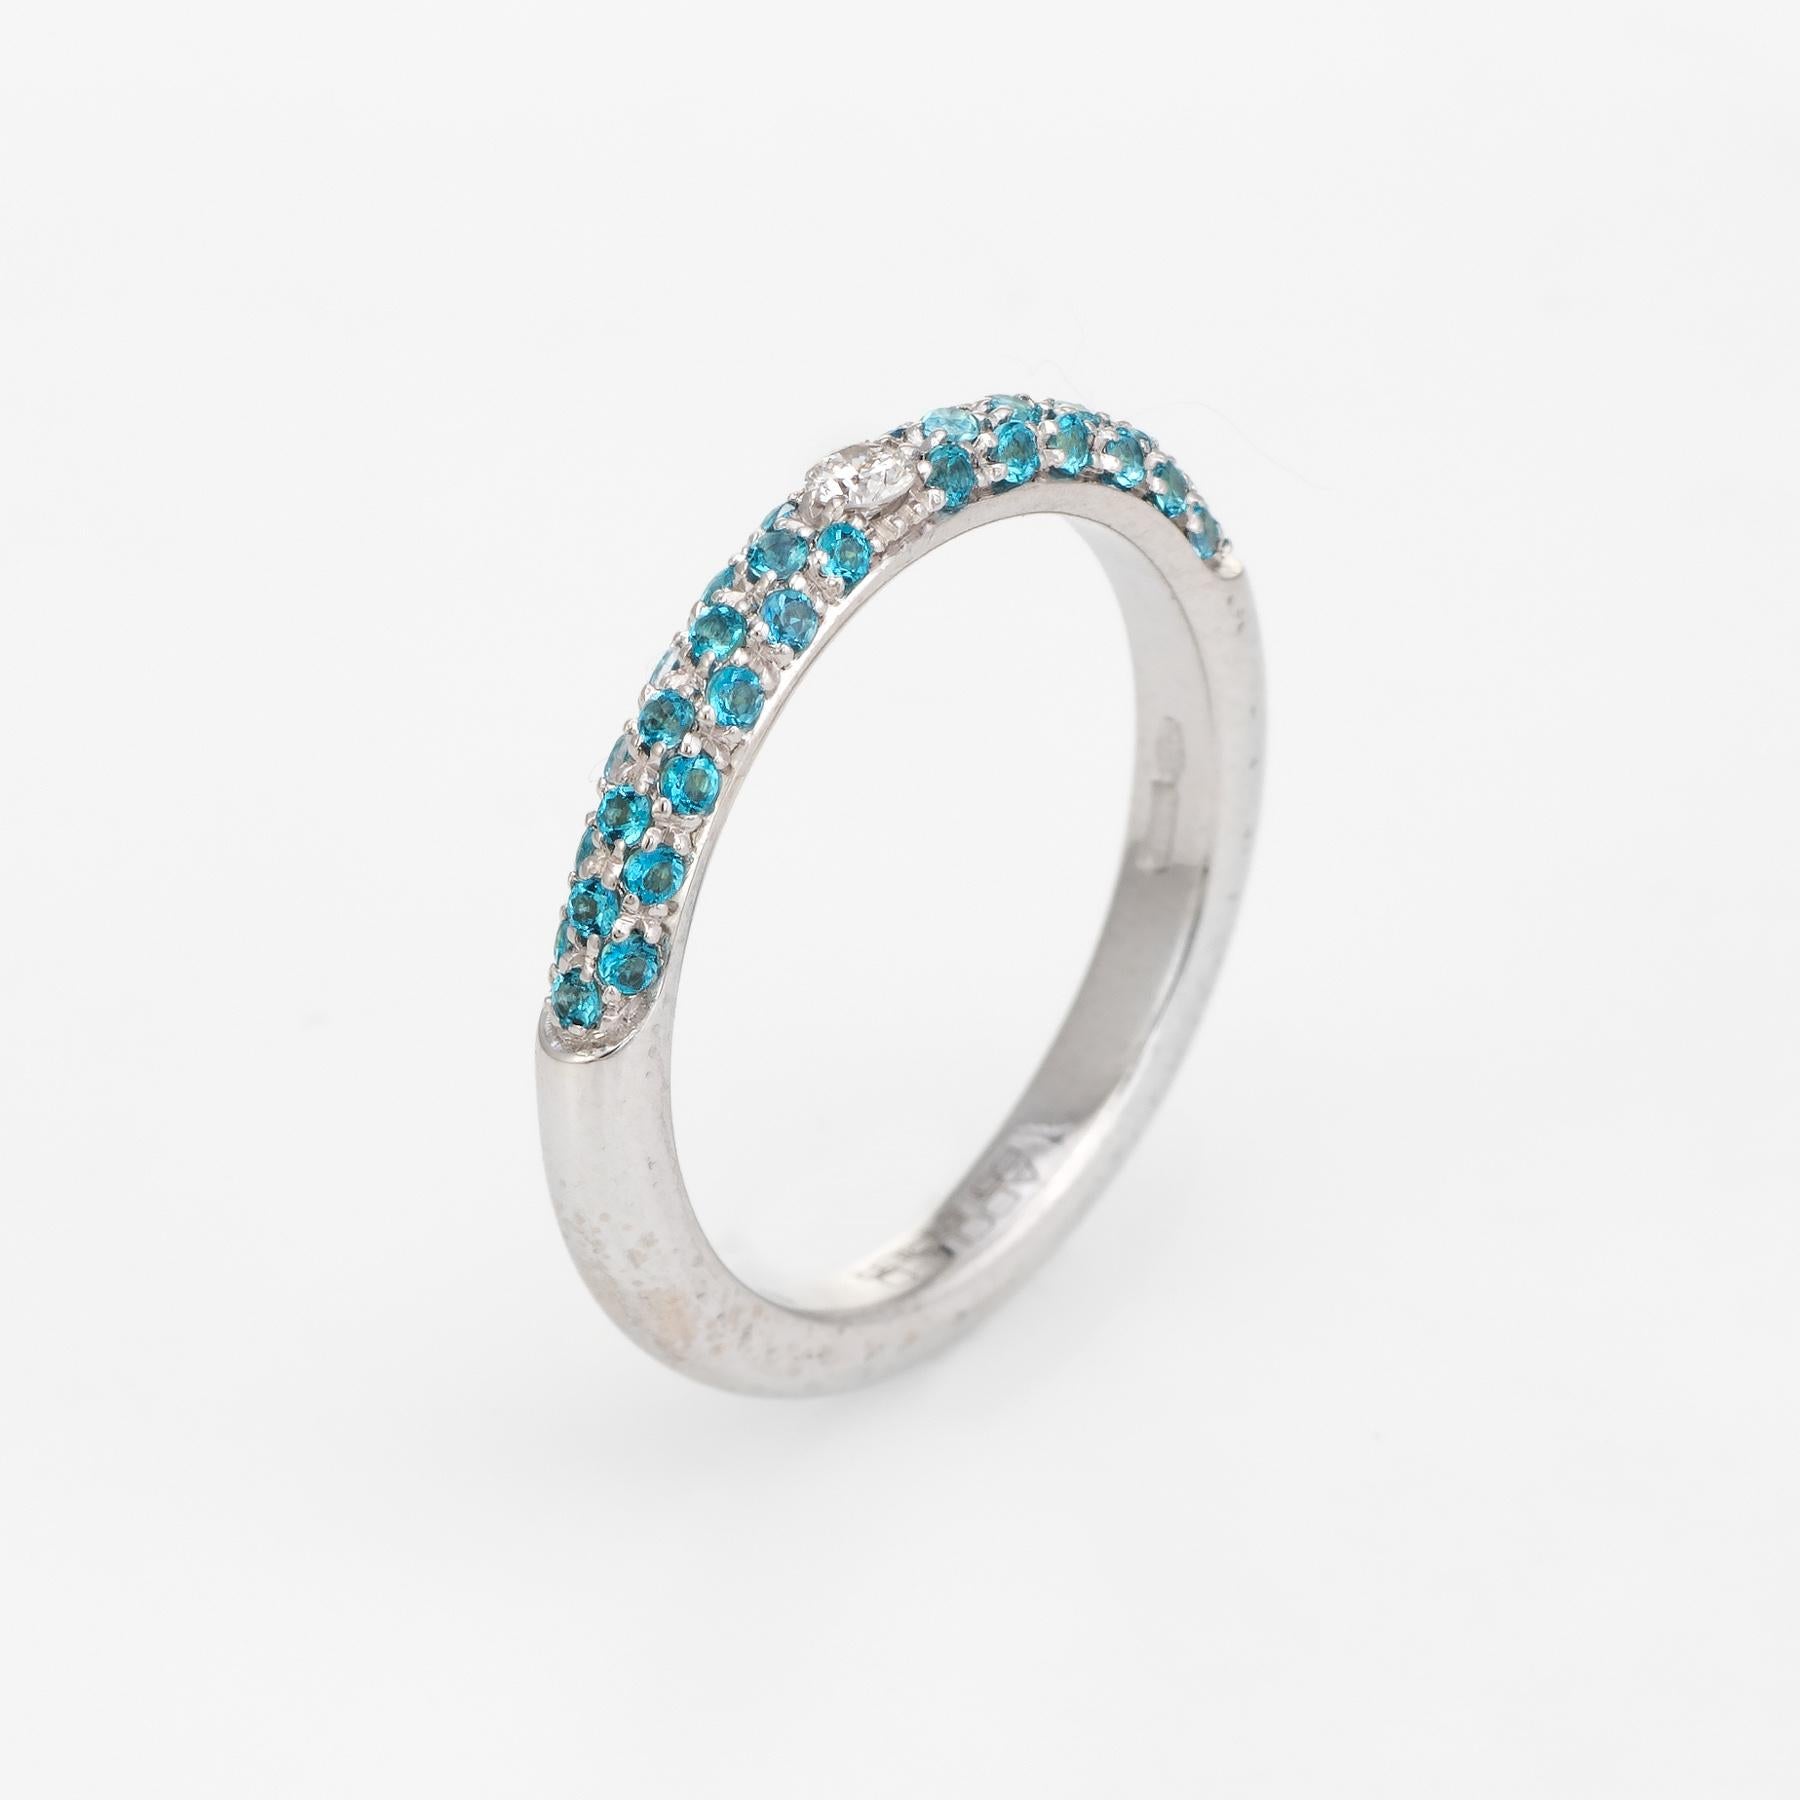 Elegant Adolfo Courrier stacking ring, crafted in 18 karat white gold. 

One estimated 0.11 carat round brilliant cut diamond (estimated at G-H color and VS2 clarity), accented with an estimated 0.70 carats of pave set turquoise. The stones are in